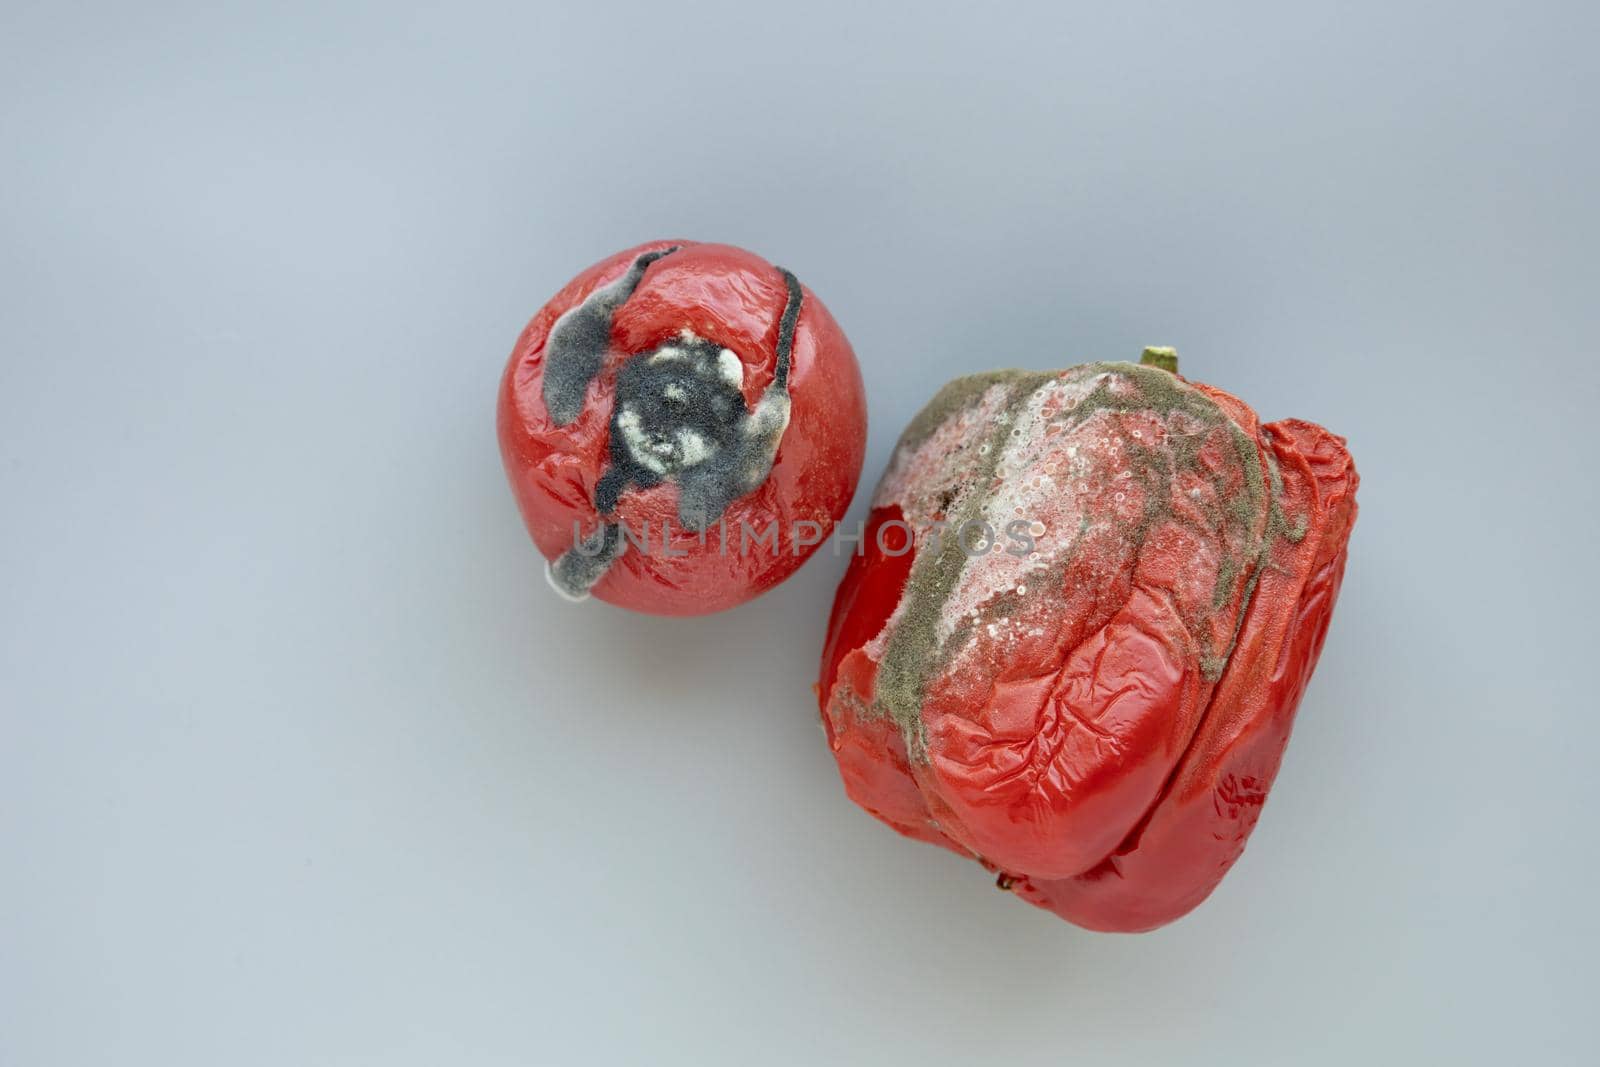 Rotten tomato and pepper with toxic dark mold, growing mildew and fungus on grey background. Expired vegetables. Wastage of Lycopersicon. Incorrect long-term storage. Food waste in supermarkets.